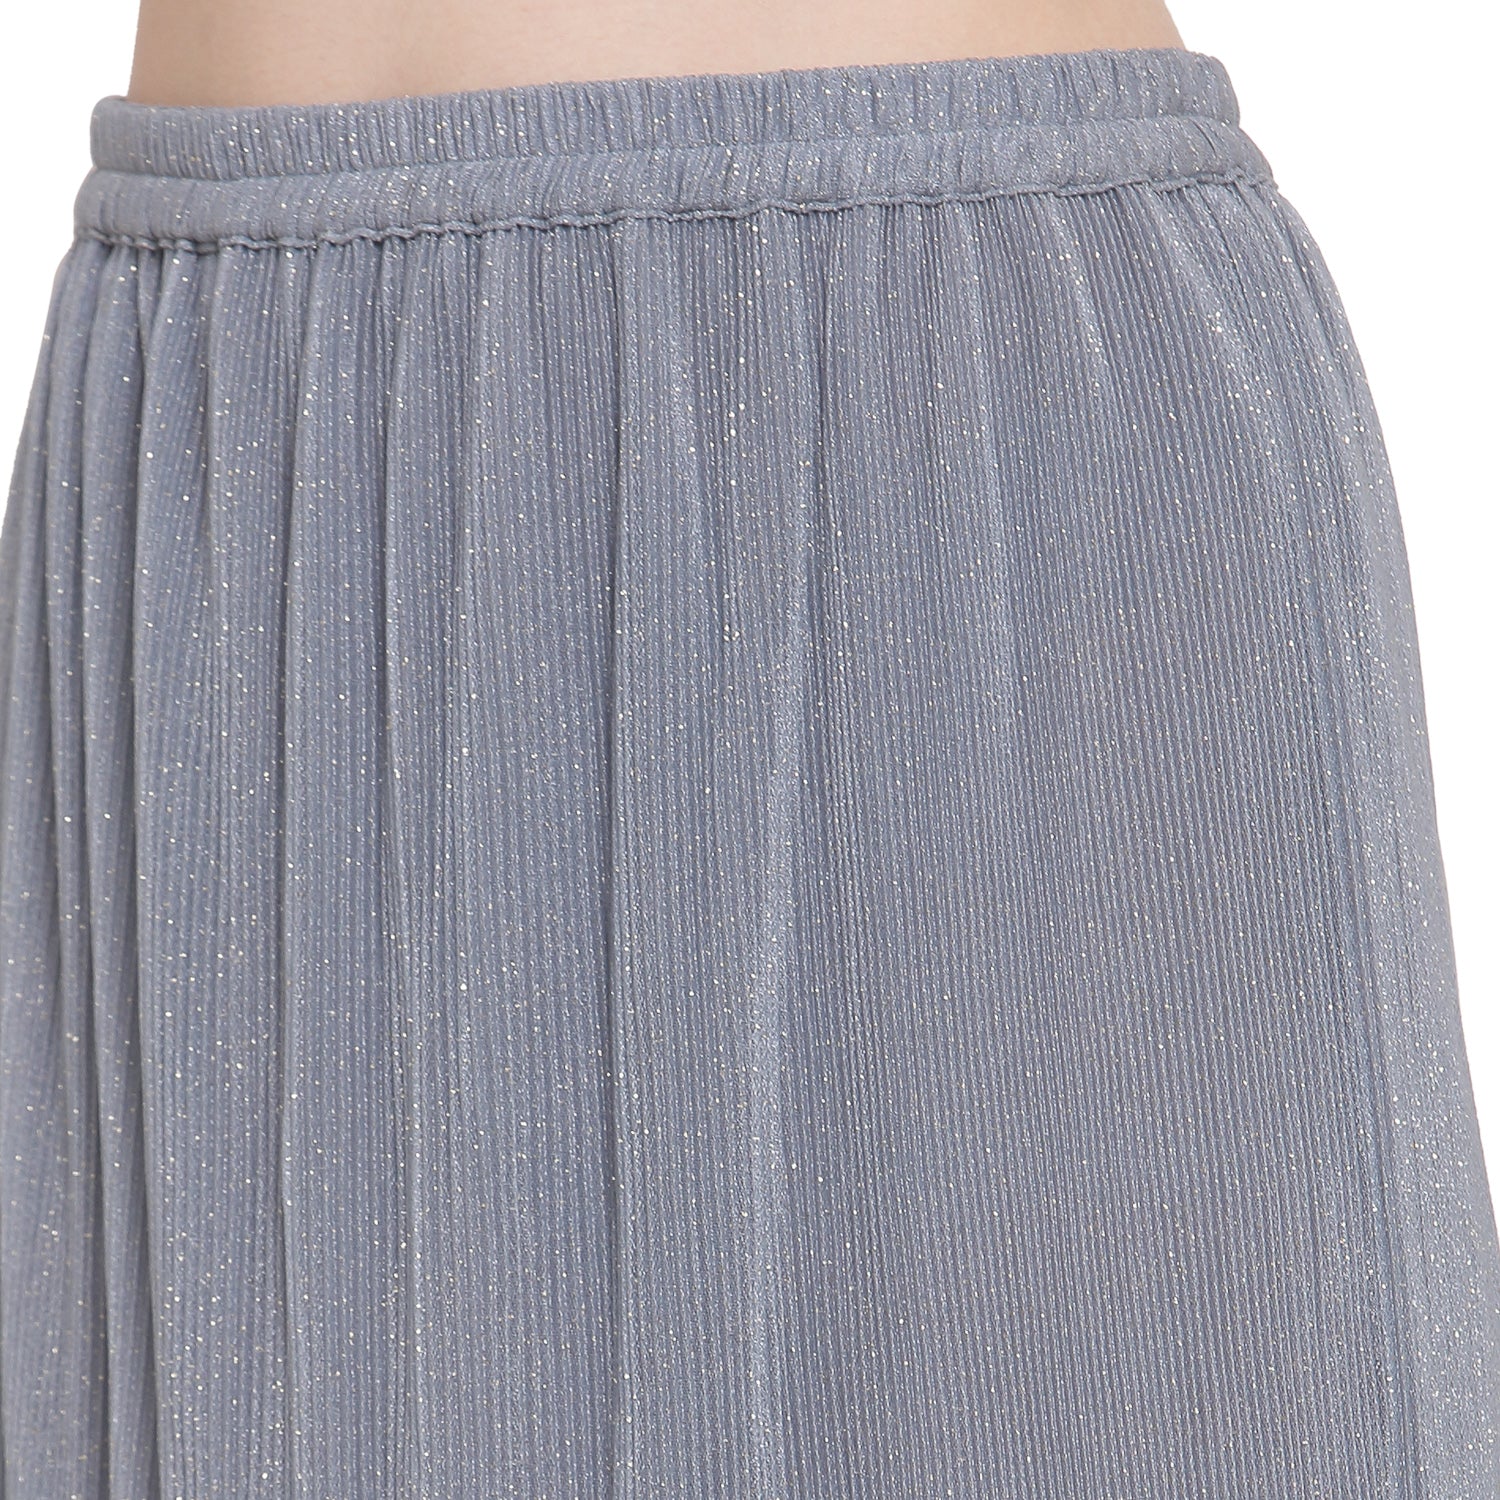 Grey Plisse Long Skirt With Frill